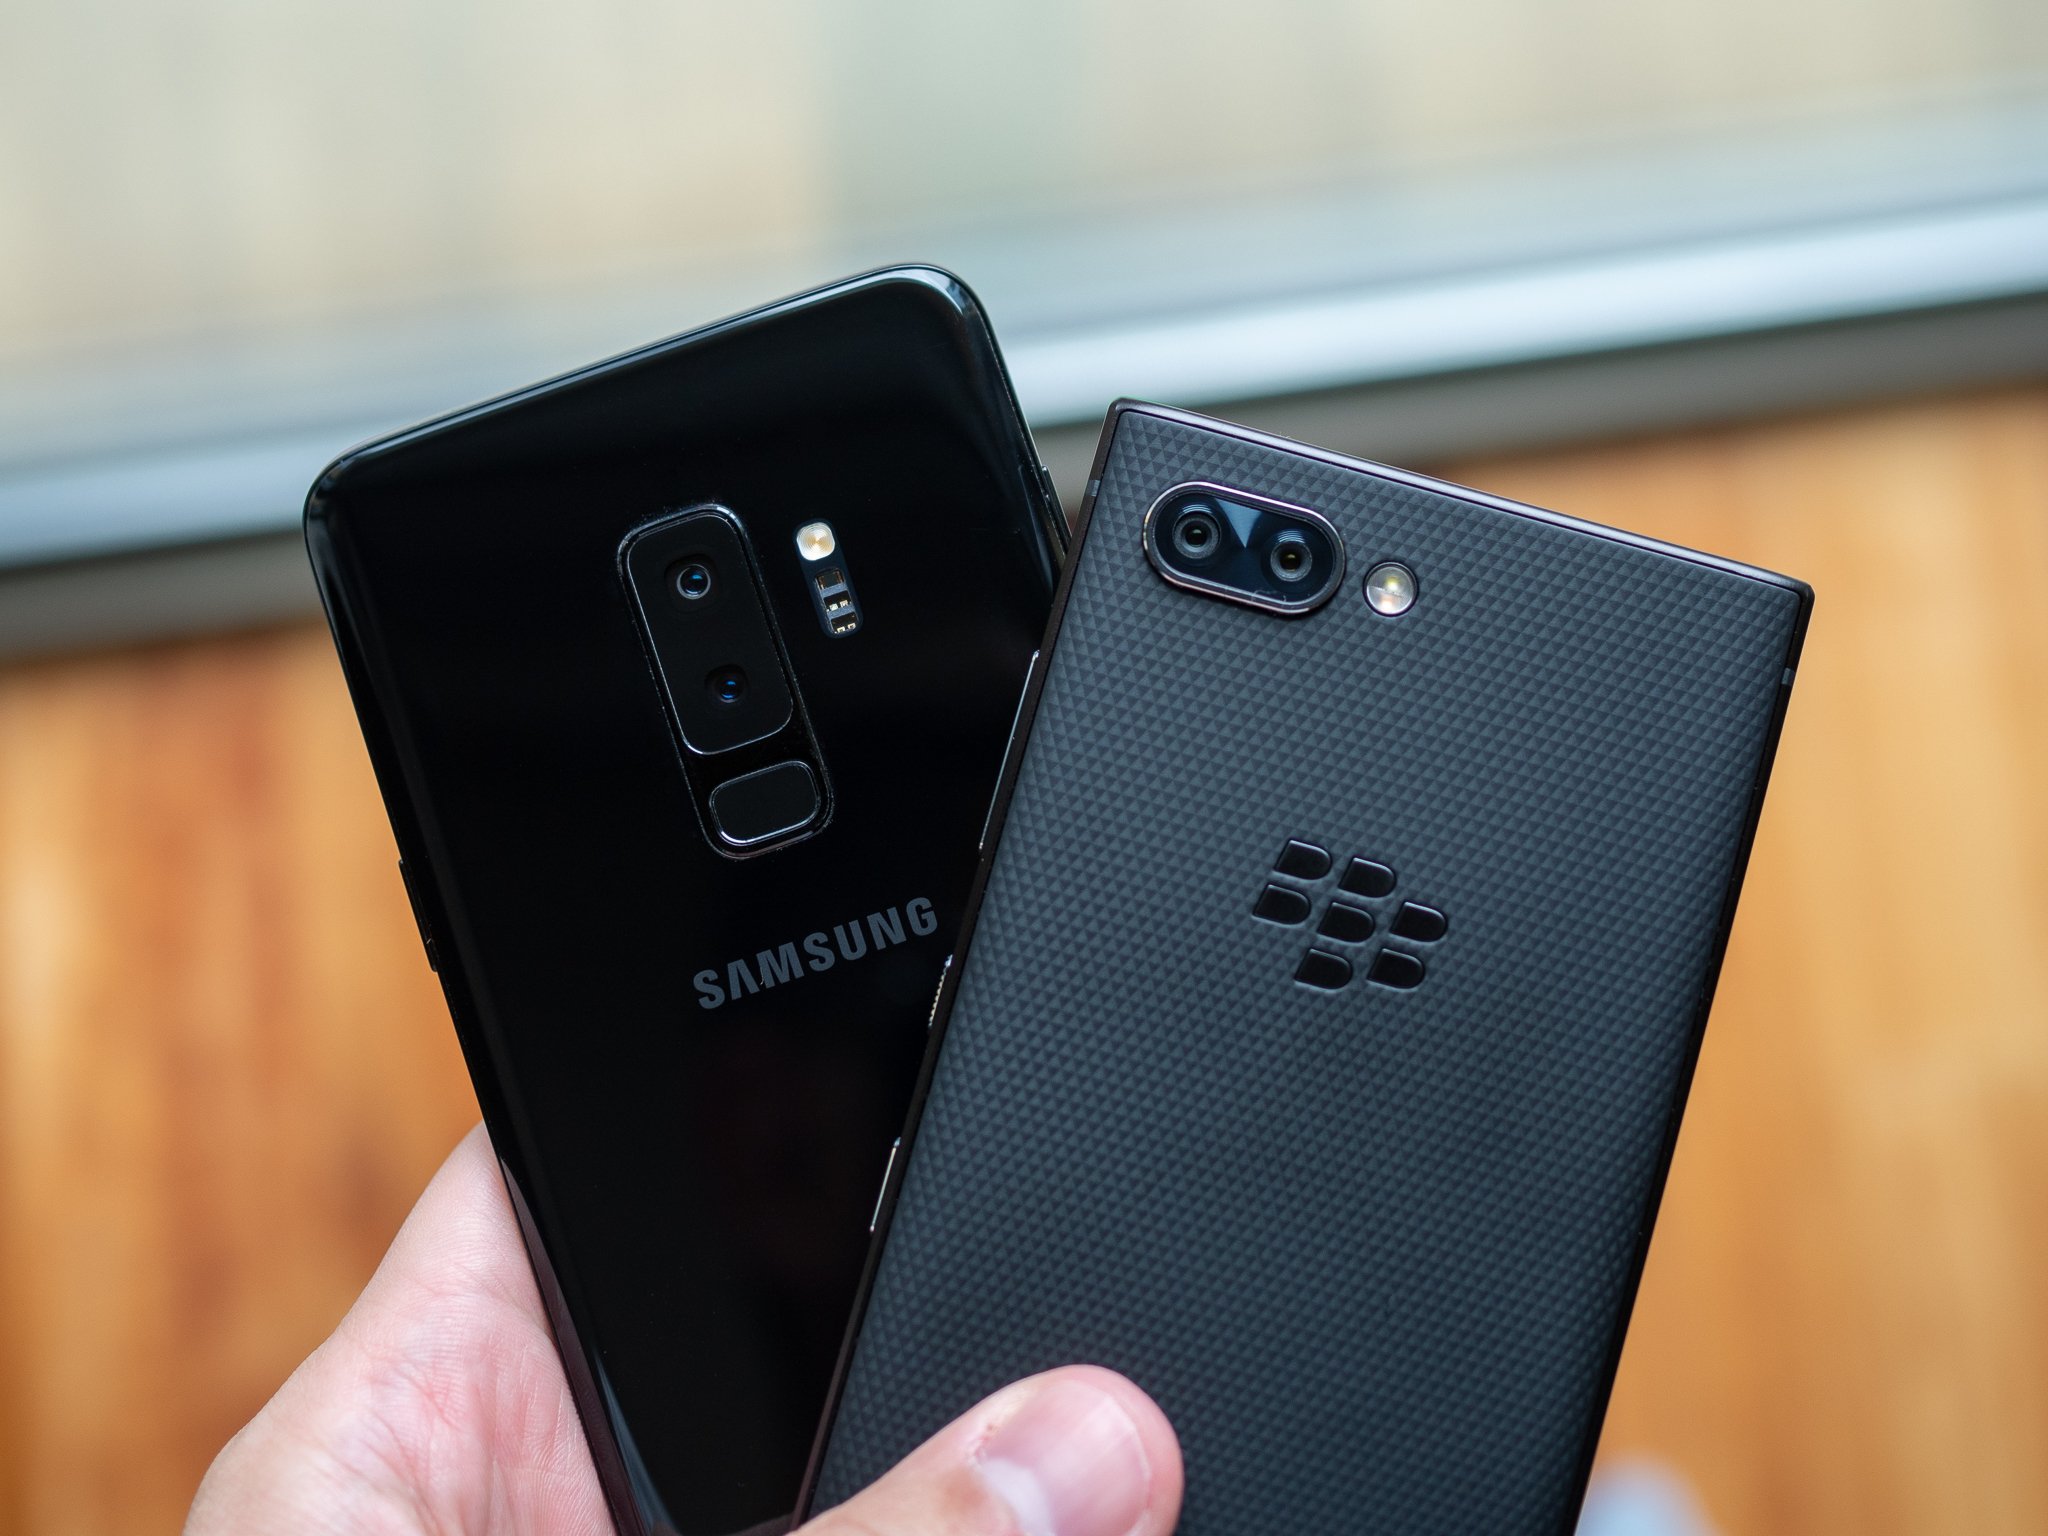 blackberry-key2-vs-samsung-galaxy-s9-and-s9-plus-is-it-a-contender